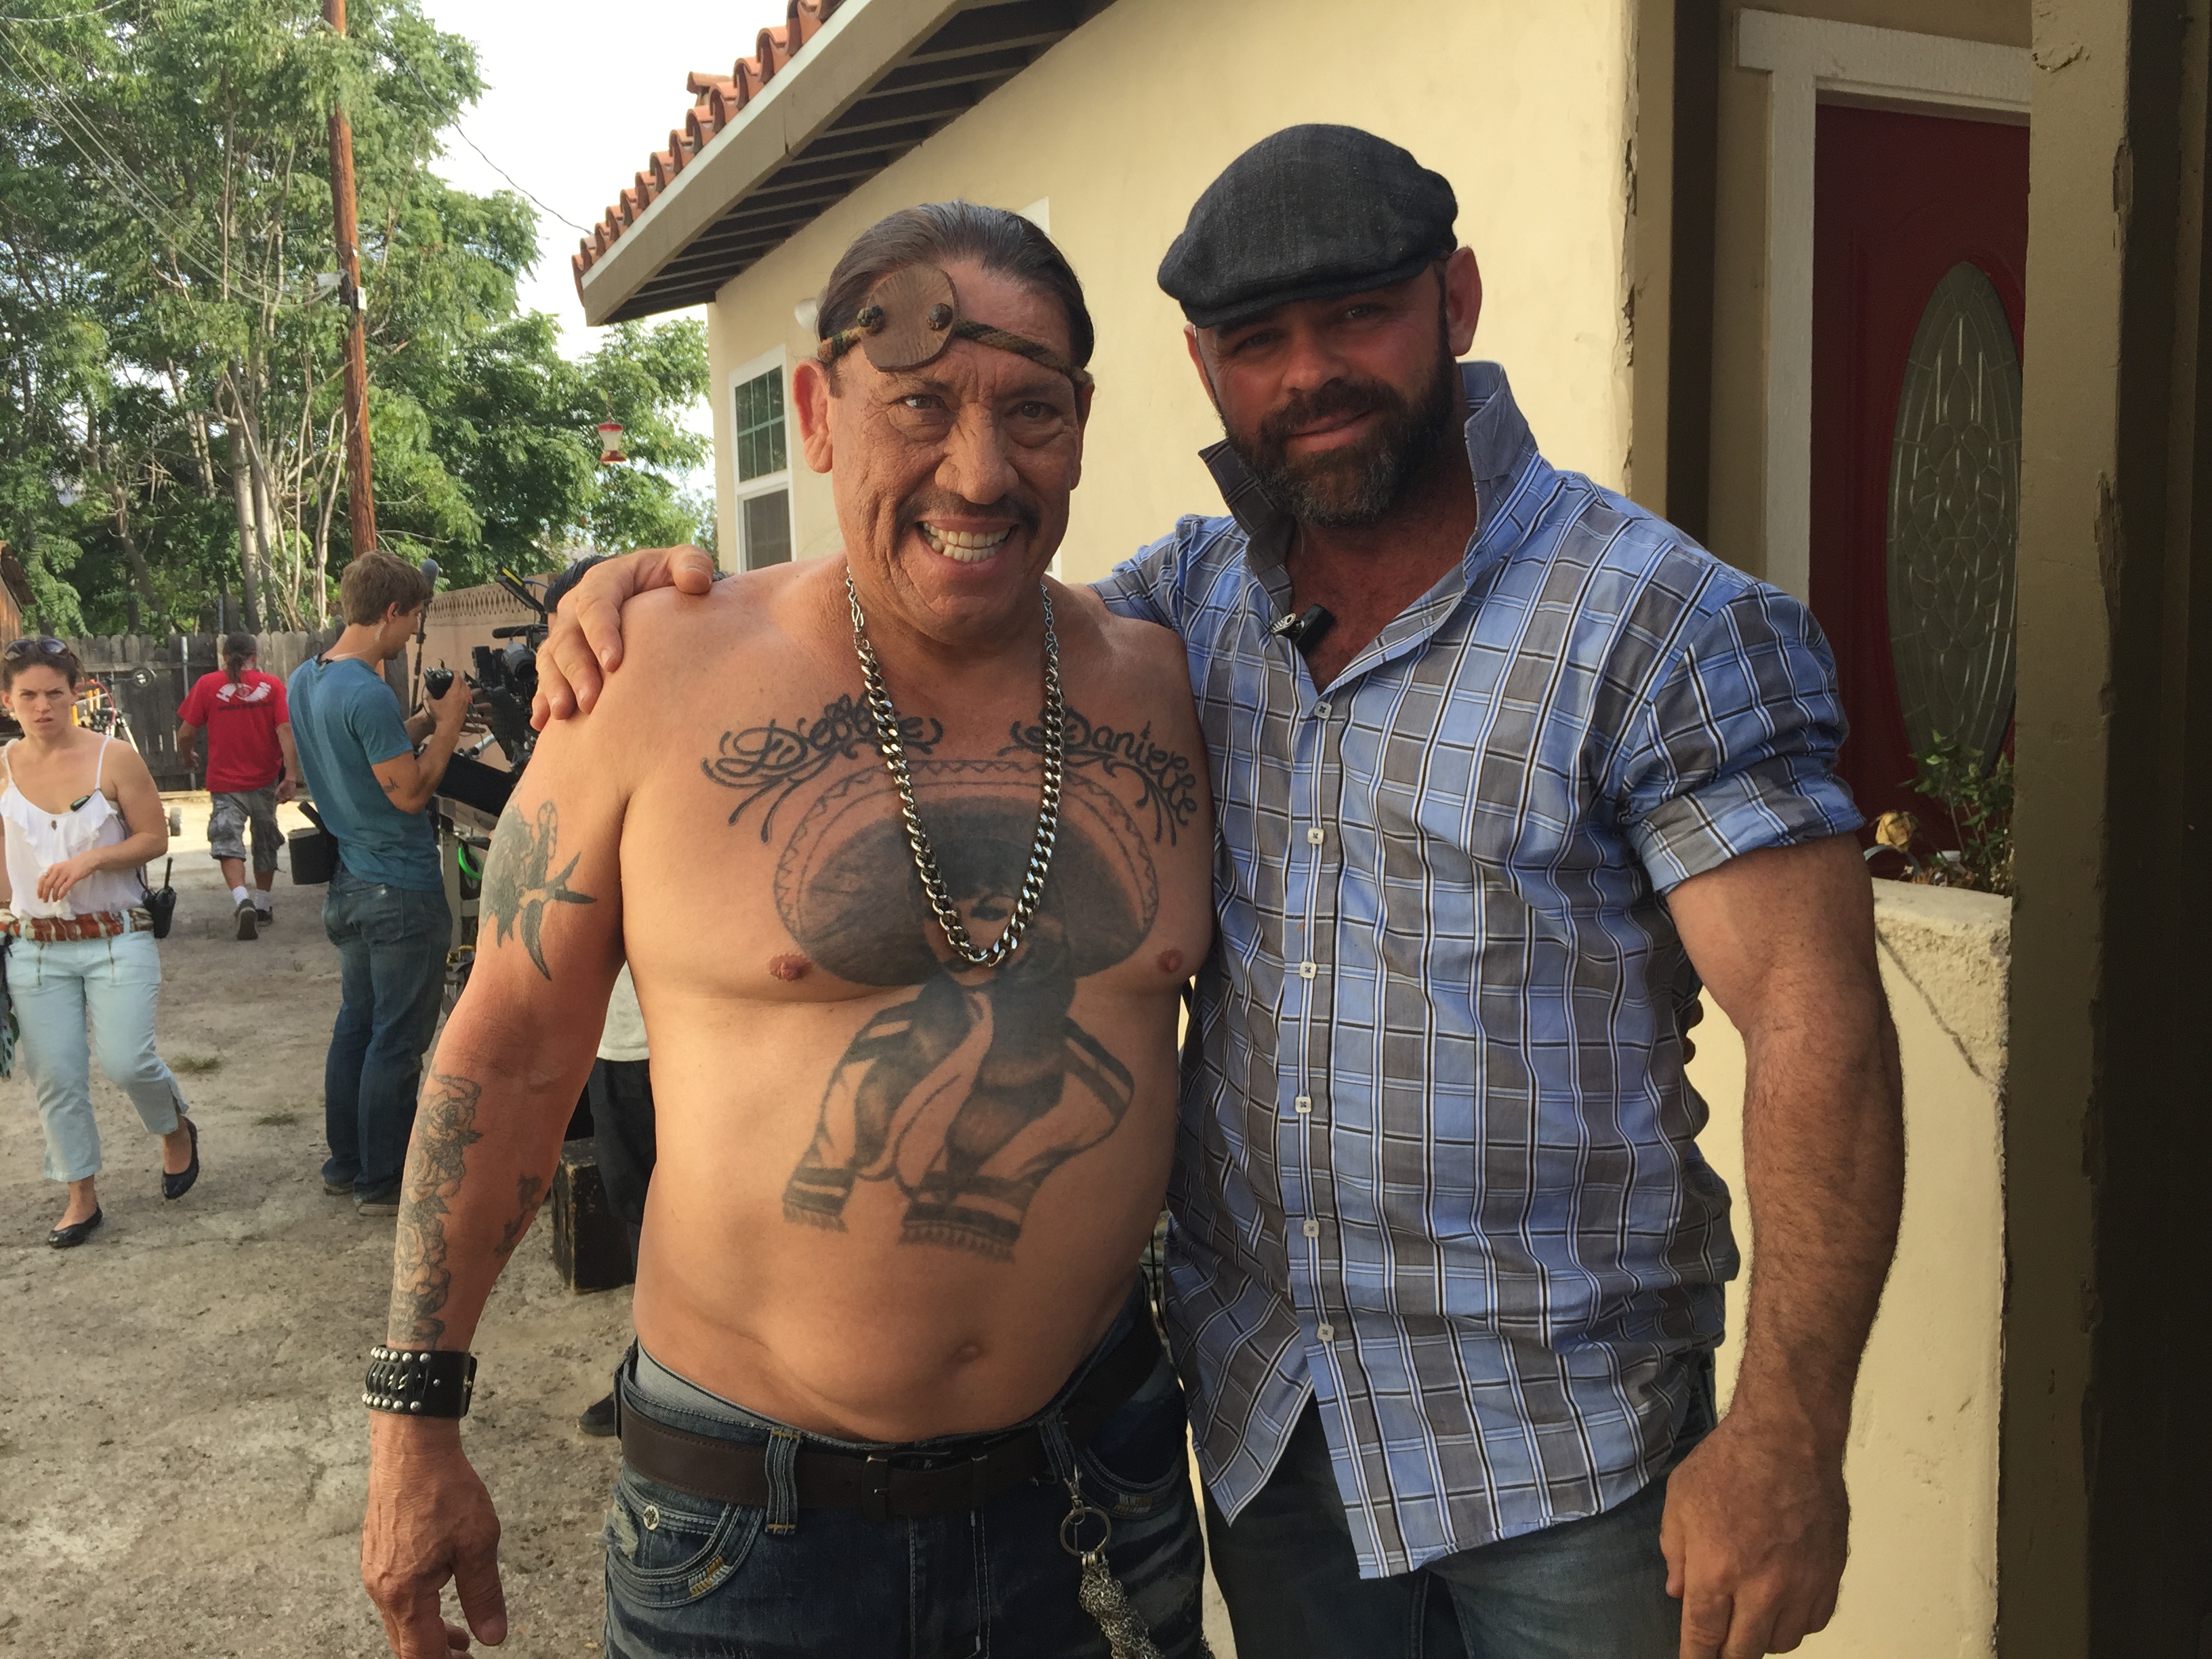 DP JT with actor Danny Trejo working on location for feature film, Halloweed